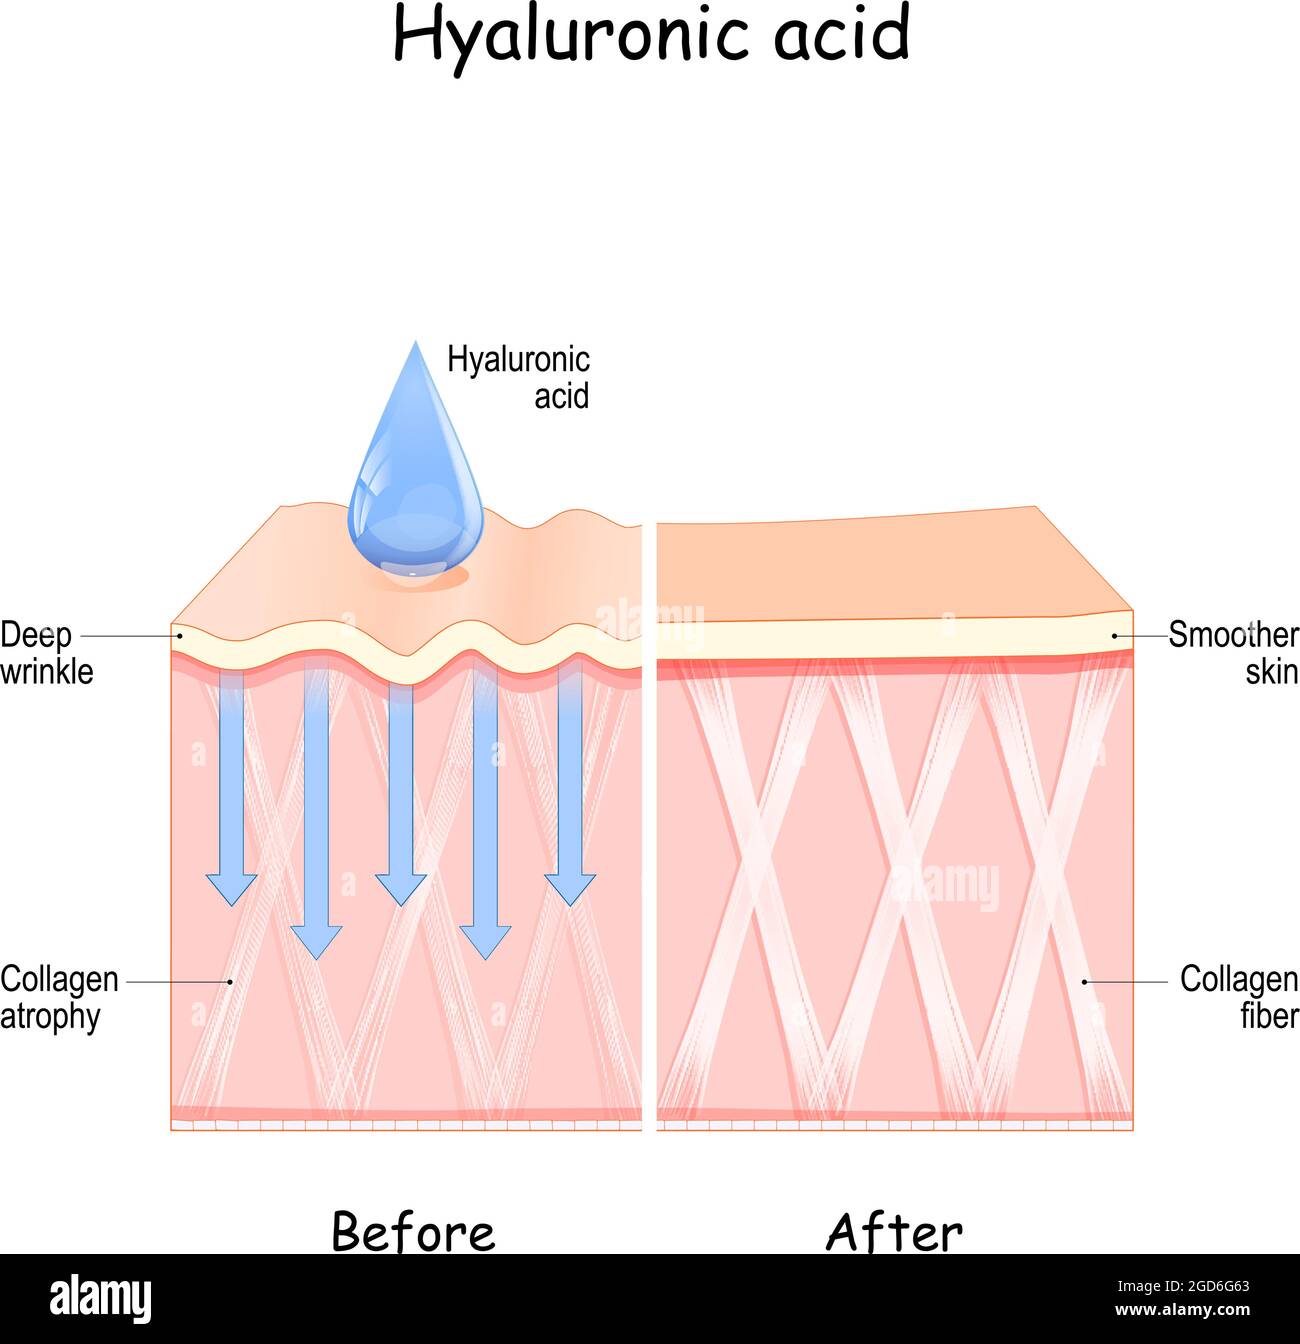 Hyaluronic acid. skin Before and After Hyaluronic acid use. comparison and difference between skin with  Collagen atrophy Stock Vector